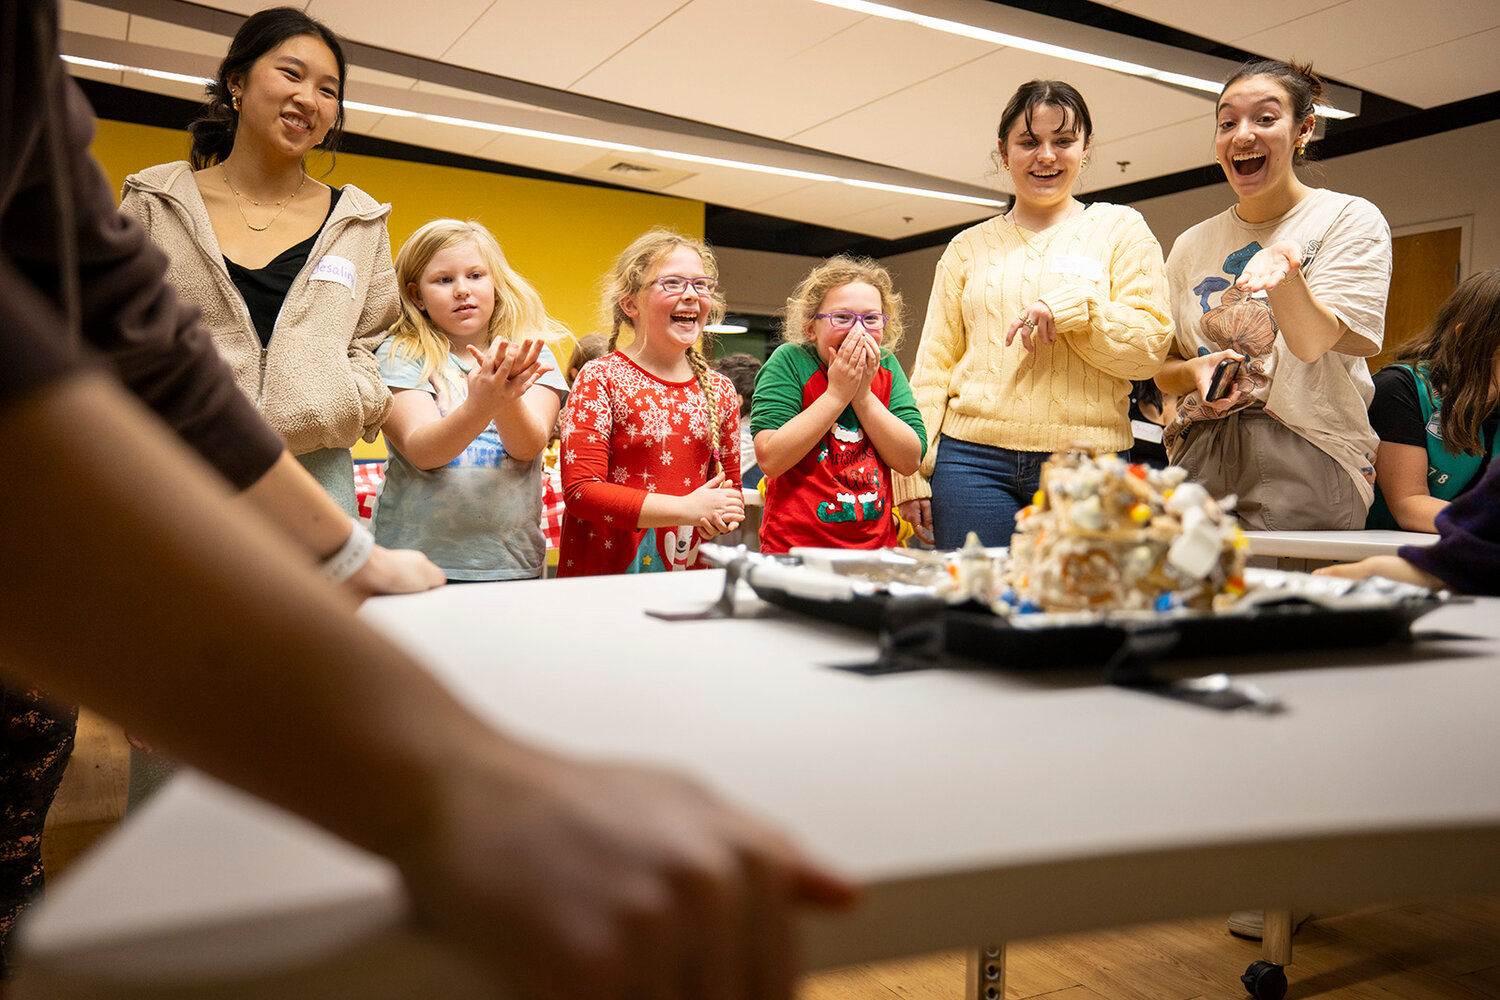 Photos of Brown University Society of Women Engineers members working with Girls Scouts at the Girl Scouts of Southeastern New England Council Headquarters in teams to build a gingerbread house that can withstand a shake test